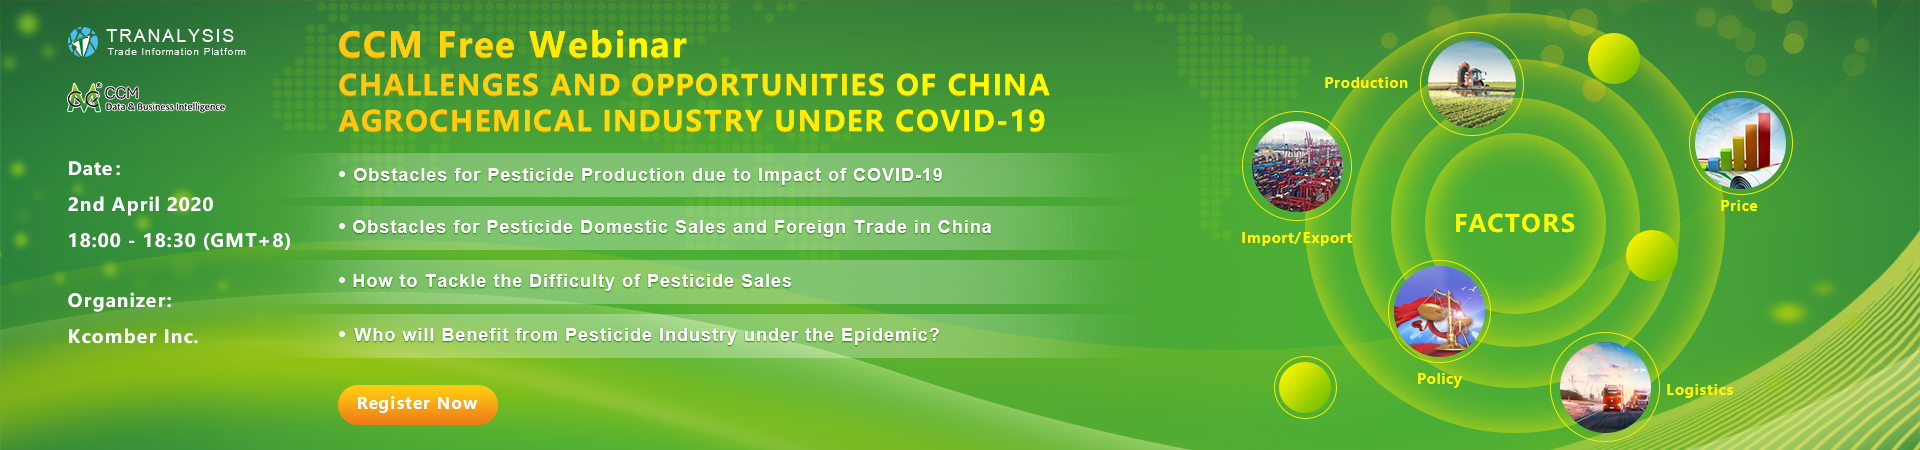 CHALLENGES AND OPPORTUNITIES OF CHINA AGROCHEMICAL INDUSTRY UNDER COVID_19